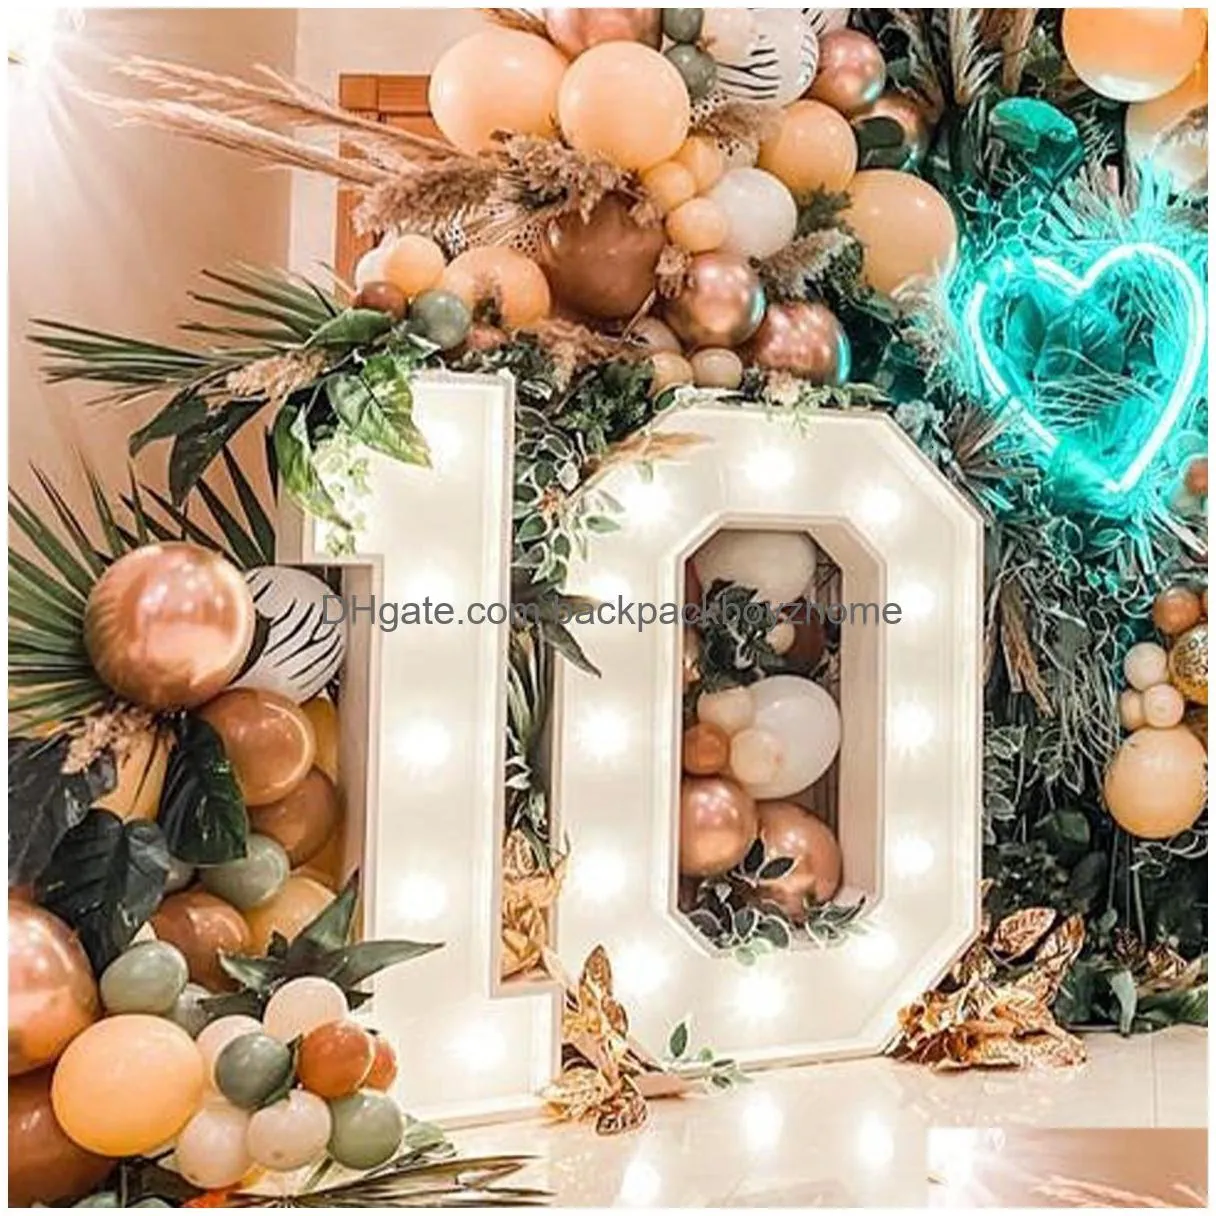 other event party supplies 91.5cm  birthday figure balloon filling box with 10 lights birthday number balloon frame wedding decoration baby shower box